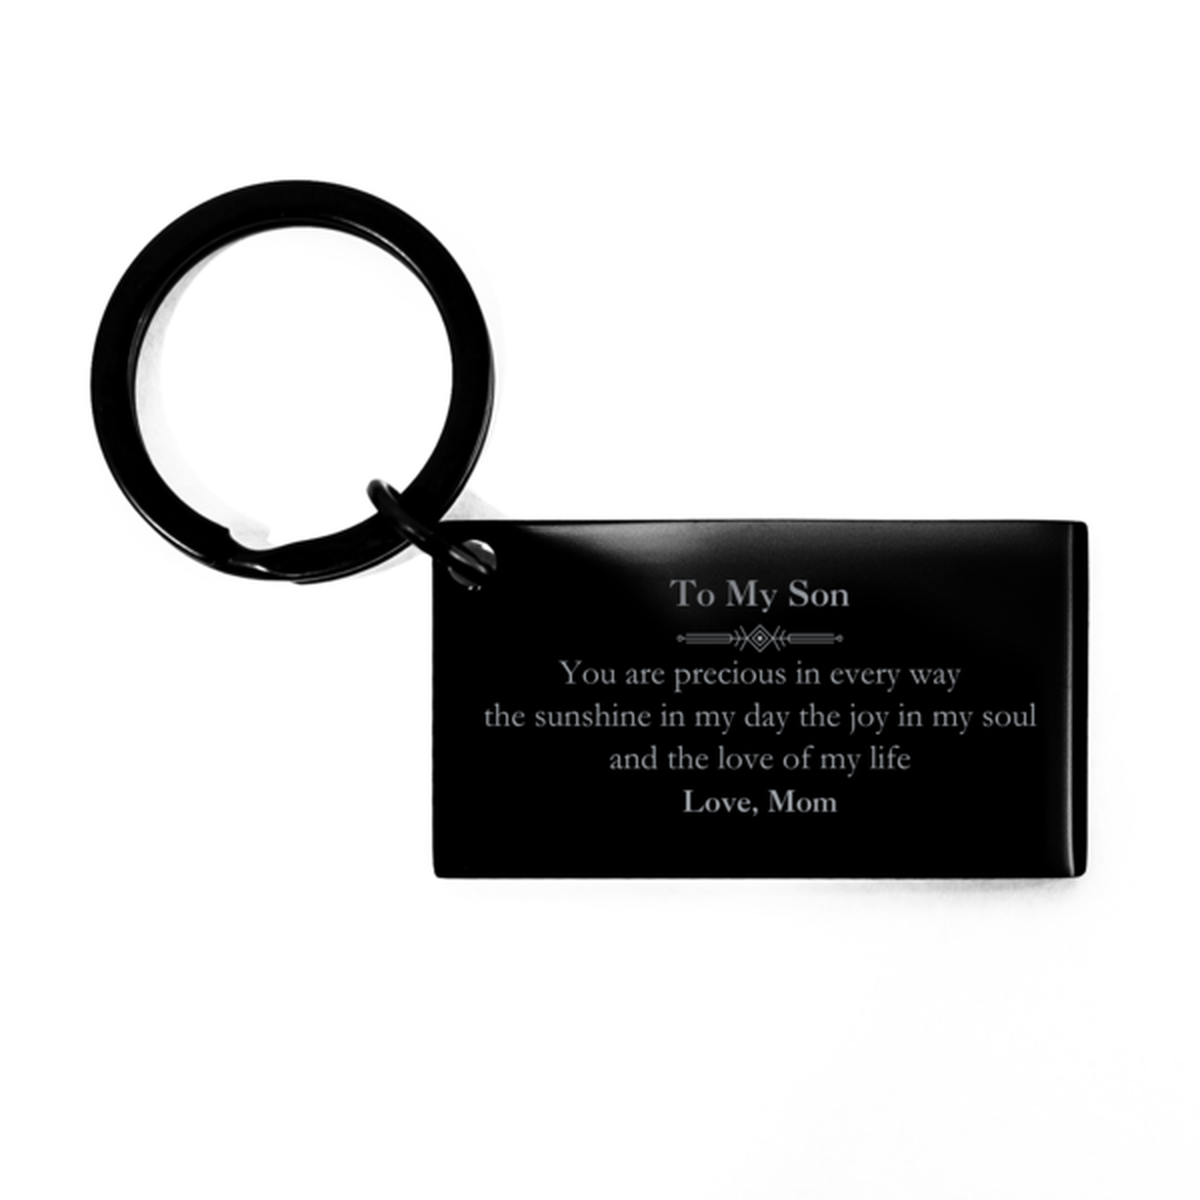 Graduation Gifts for Son Keychain Present from Mom, Christmas Son Birthday Gifts Son You are precious in every way the sunshine in my day. Love, Mom